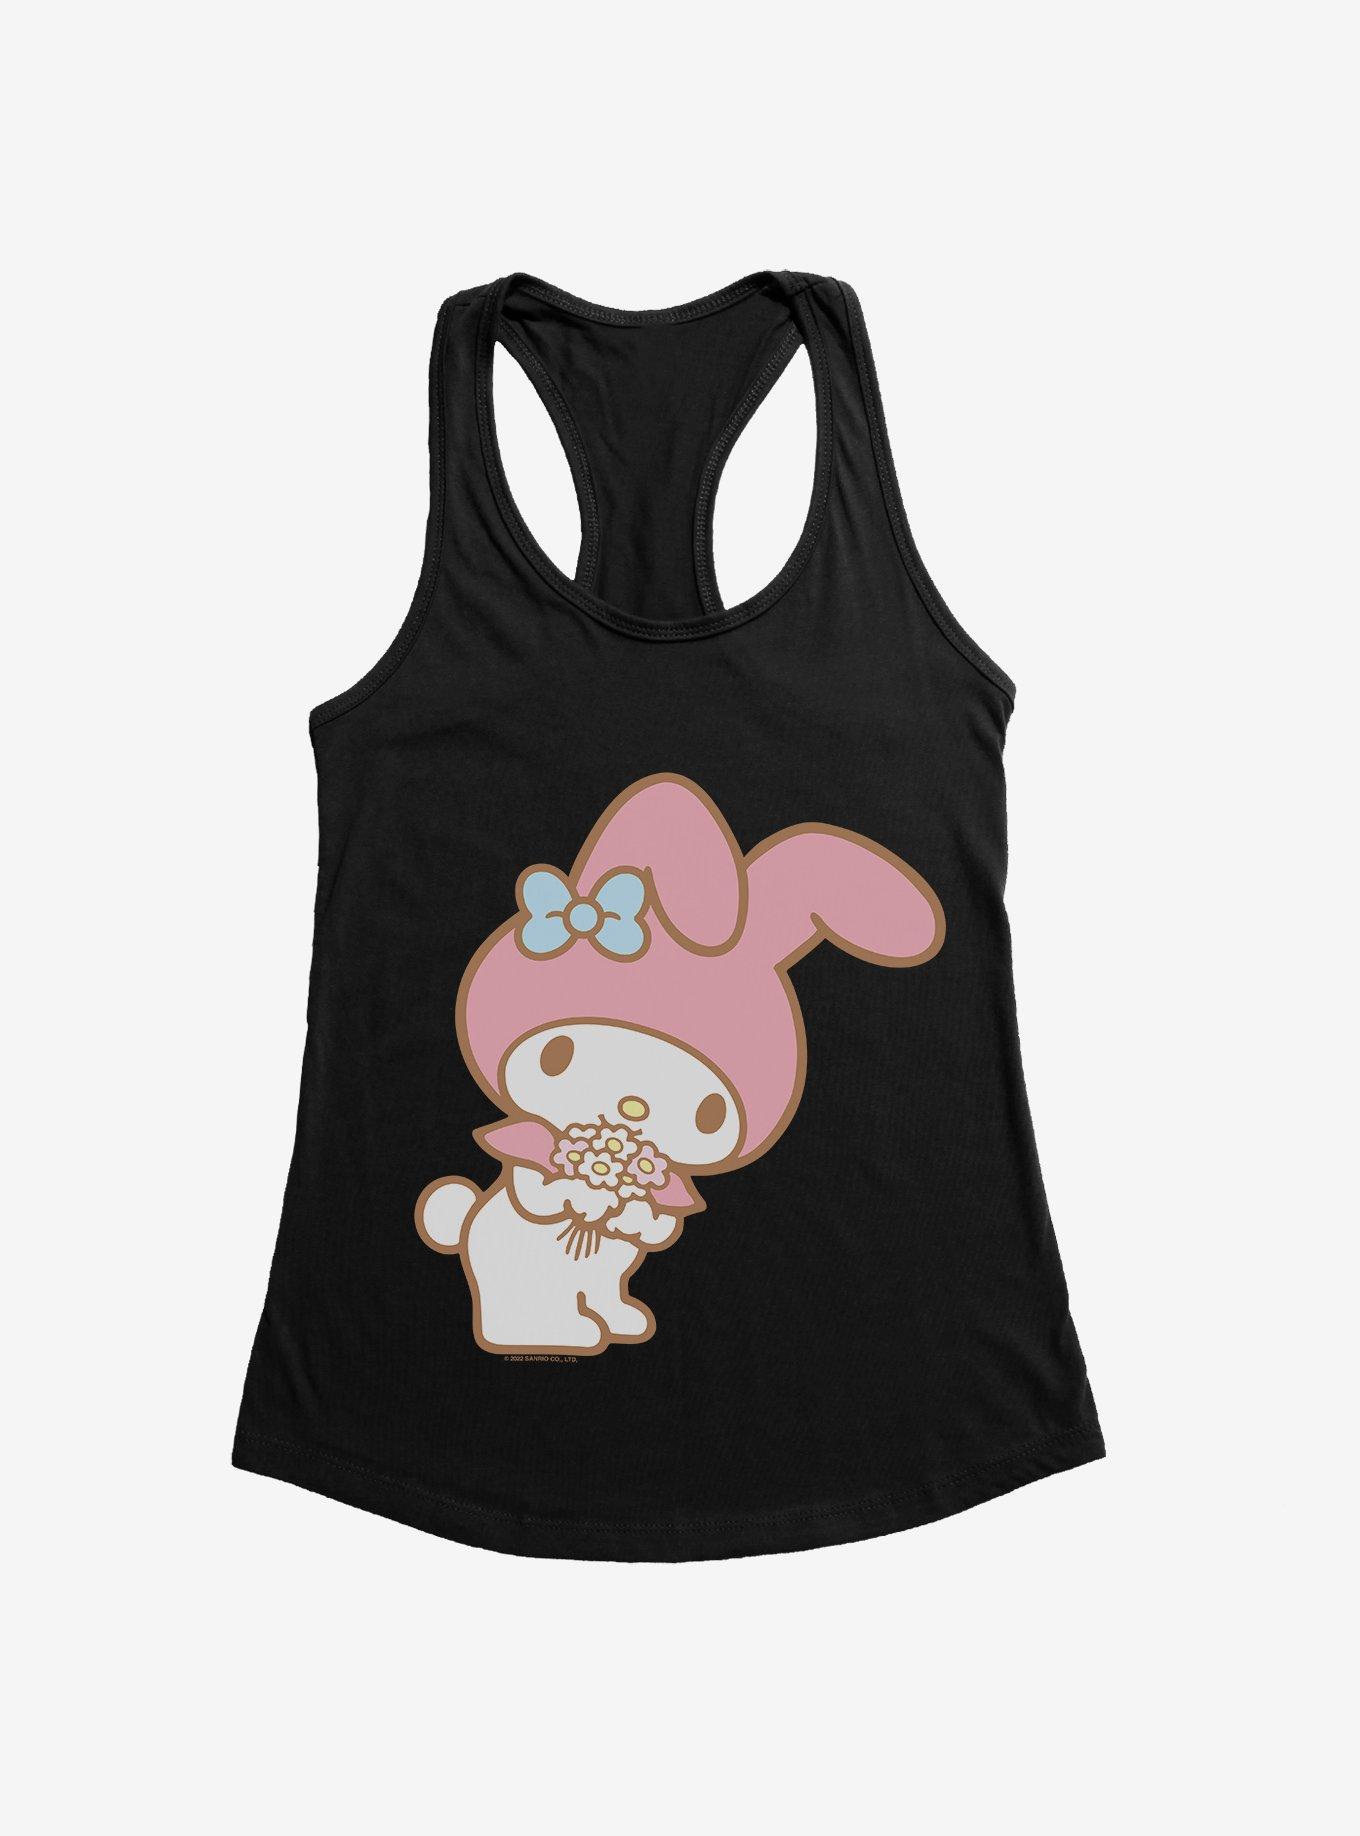 My Melody Bouquet Of Flowers Girls Tank